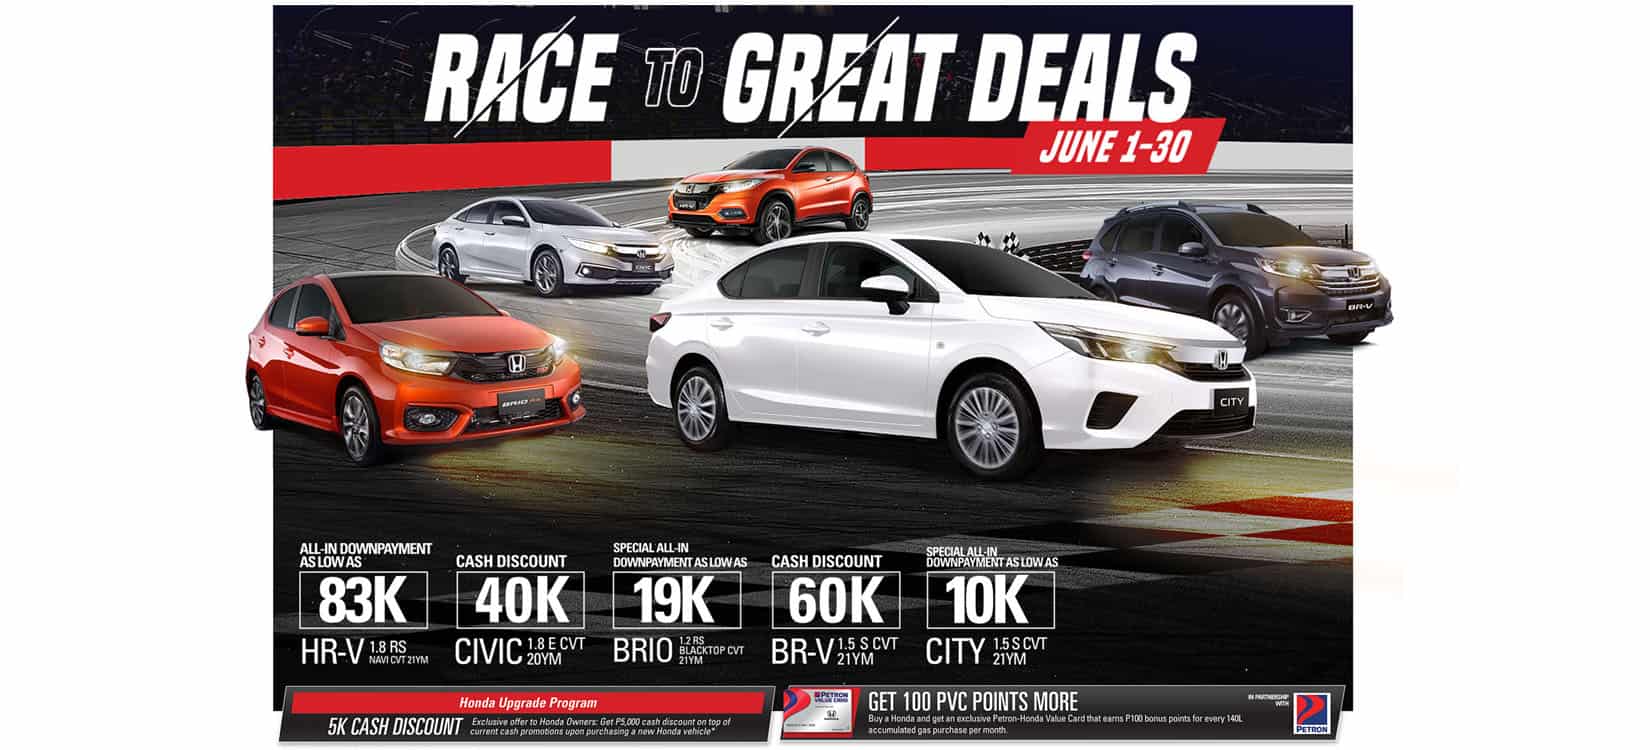 Exciting promos and great deals await Honda customers this June